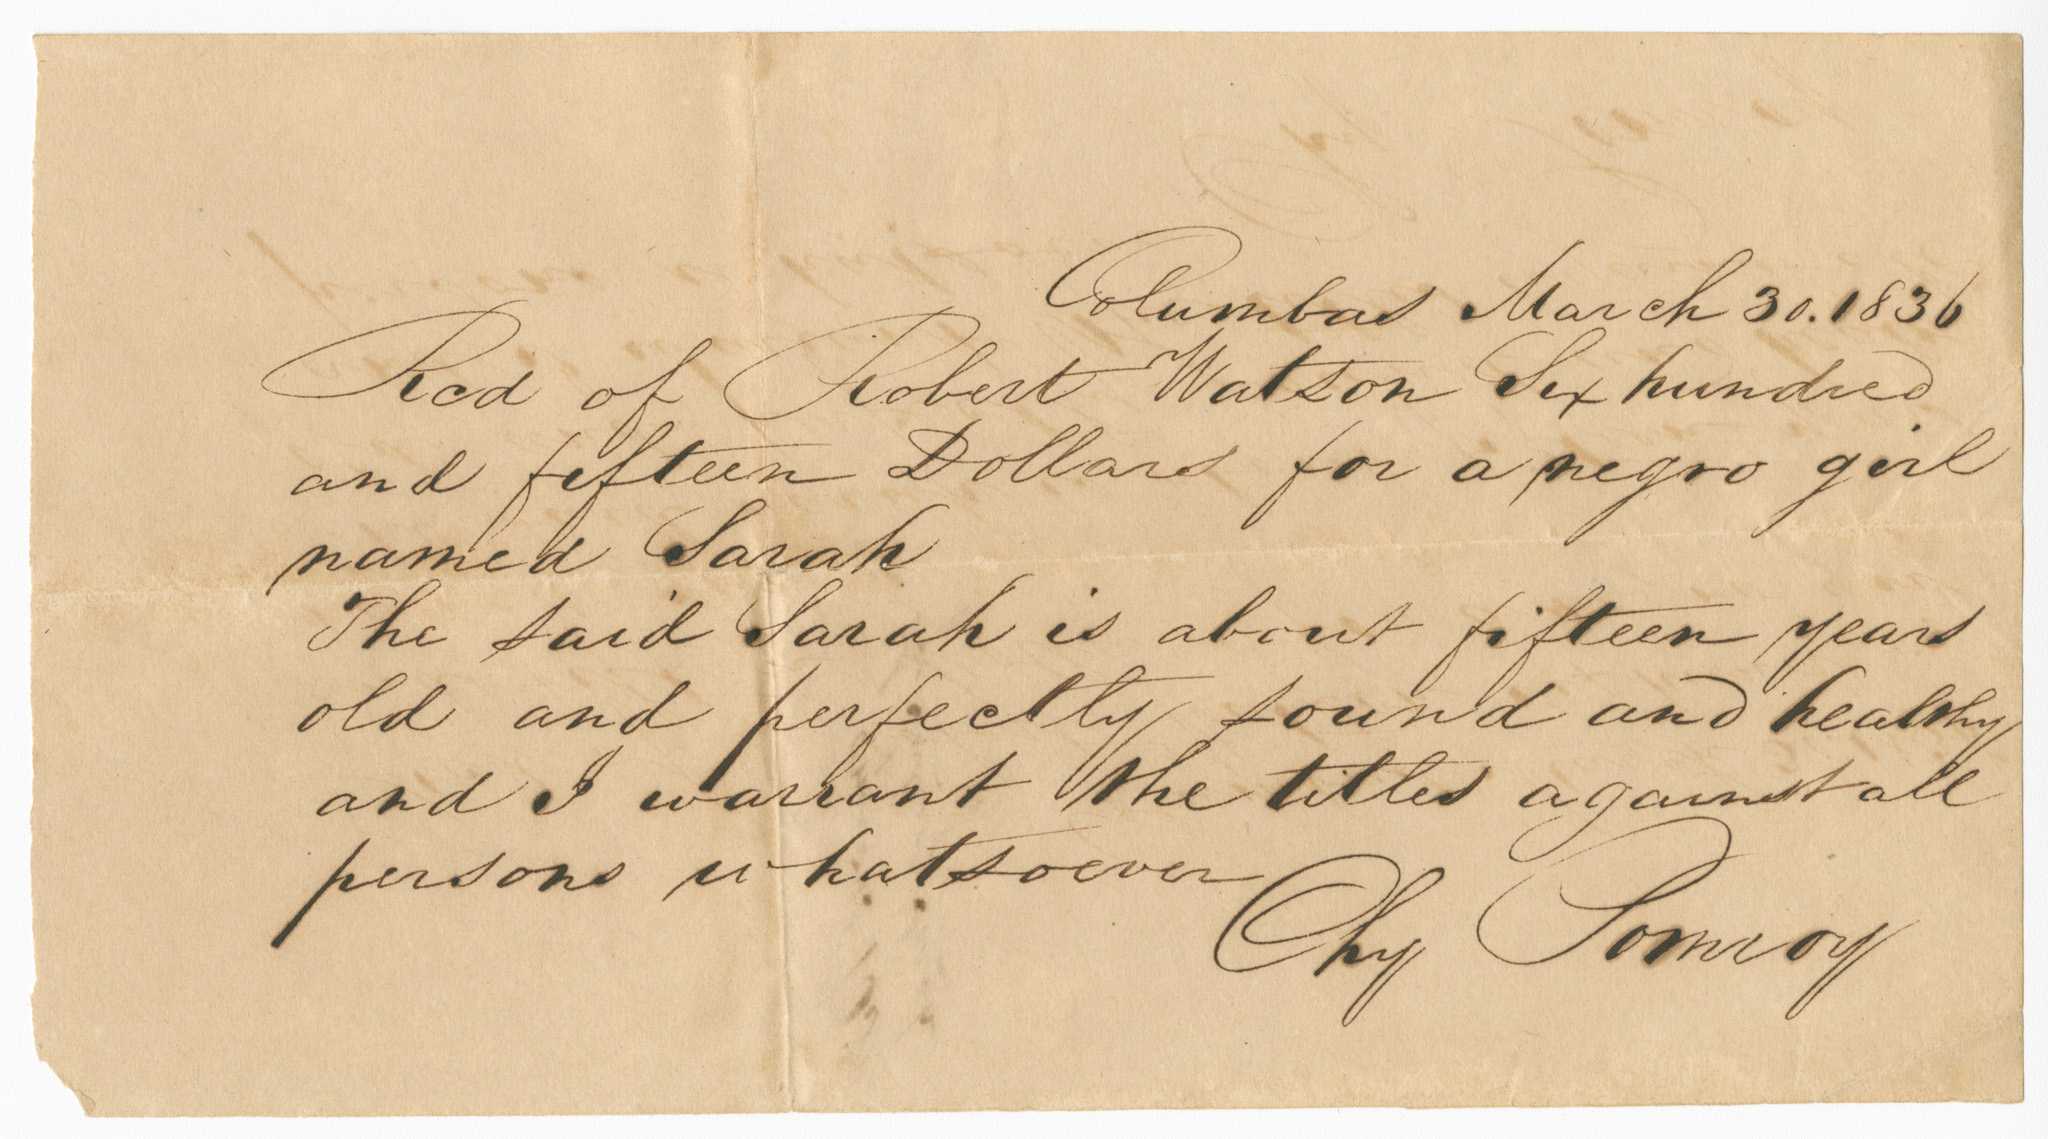 A handwritten bill of sale written in black ink detailing the sale of an enslaved girl named Sarah for $615.00 to Robert Watson in Columbus, Georgia. The document was written by a seller with the last name Pomroy whose first name is illegible. The front of the document reads: [Columbas March 30. 1836 / Rcd of Robert Watson Six hundred / and fifteen Dollars for a negro girl / named Sarah / The said Sarah is about fifteen years / old and perfectly sound and healthy / and I warrant the titles against all / persons whatsoever / [illegible] Pomroy]. The back of the document reads: [Pomroys Bill / of Sale of Sarah].